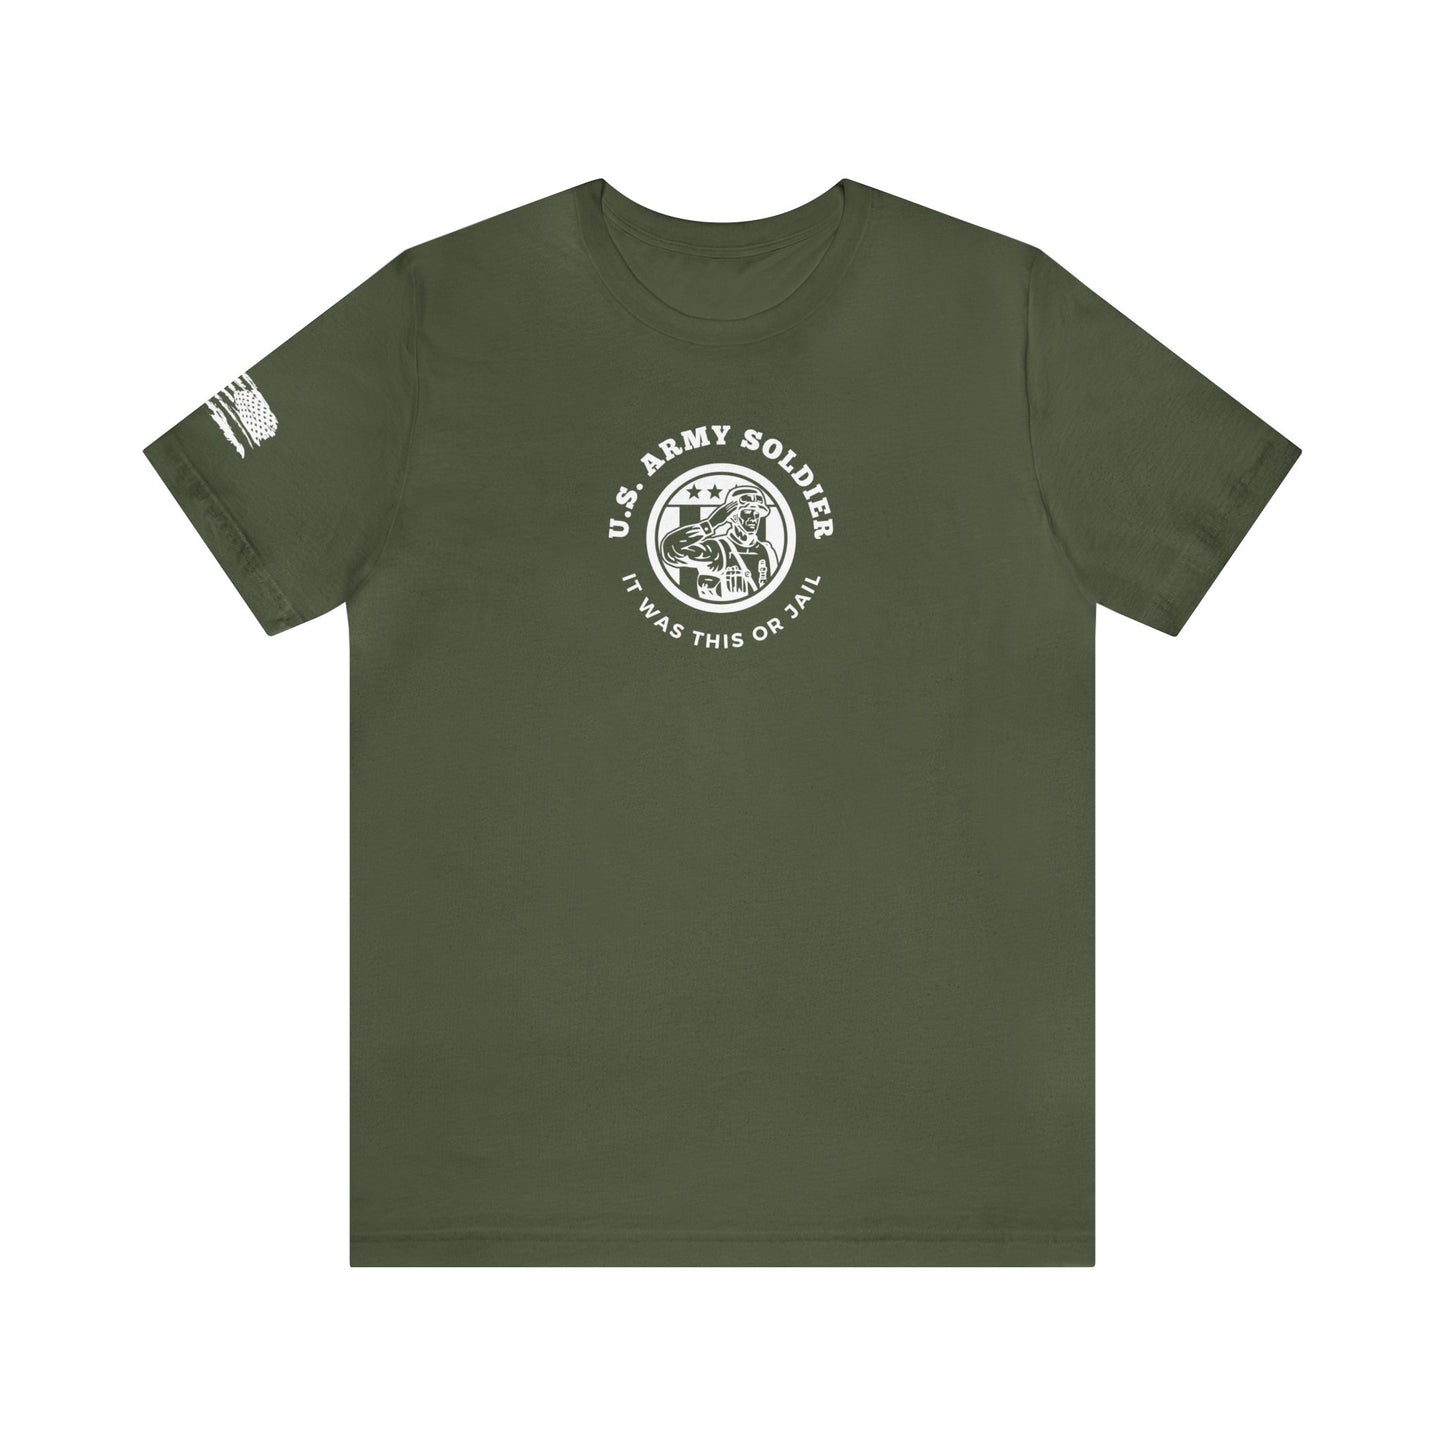 Funny US Army Soldier T-shirt, Army Soldier Funny T-shirt